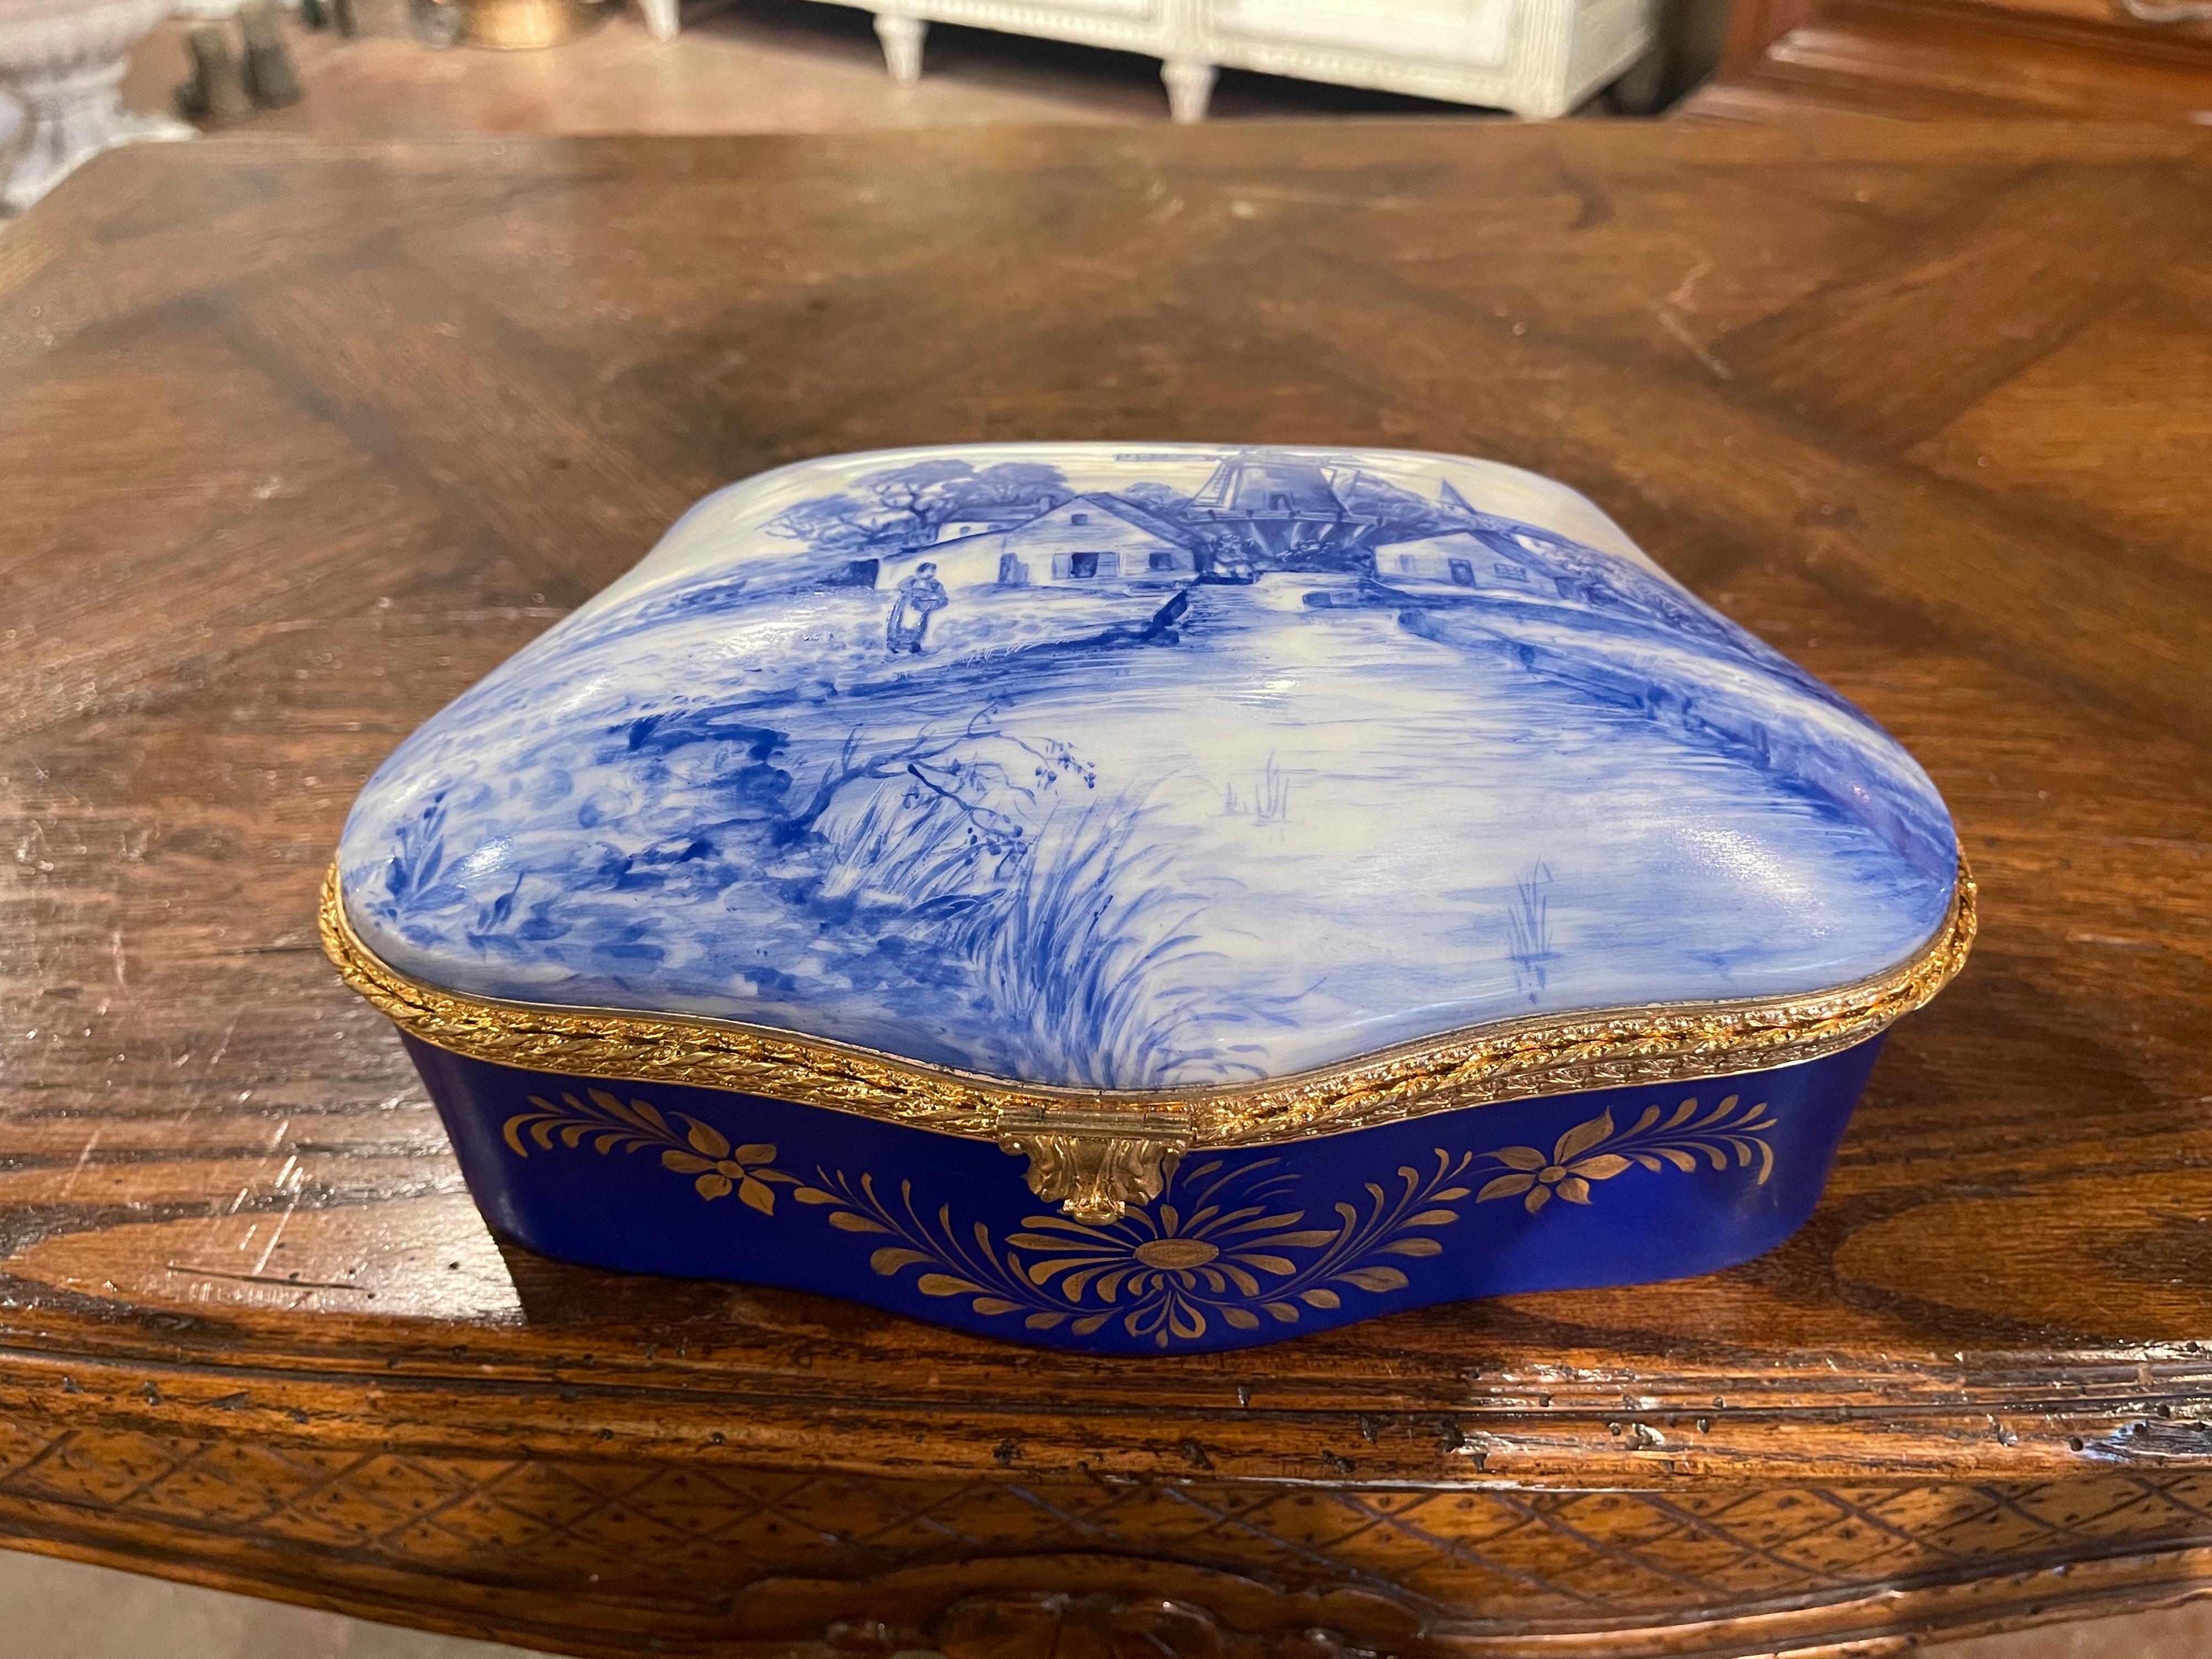 Decorate a master bathroom or powder room with this colorful antique jewelry box; crafted in France circa 1920 in the style of Delft, the porcelain bombe casket with cobalt blue and gilt border, features a traditional hand painted pastoral scene